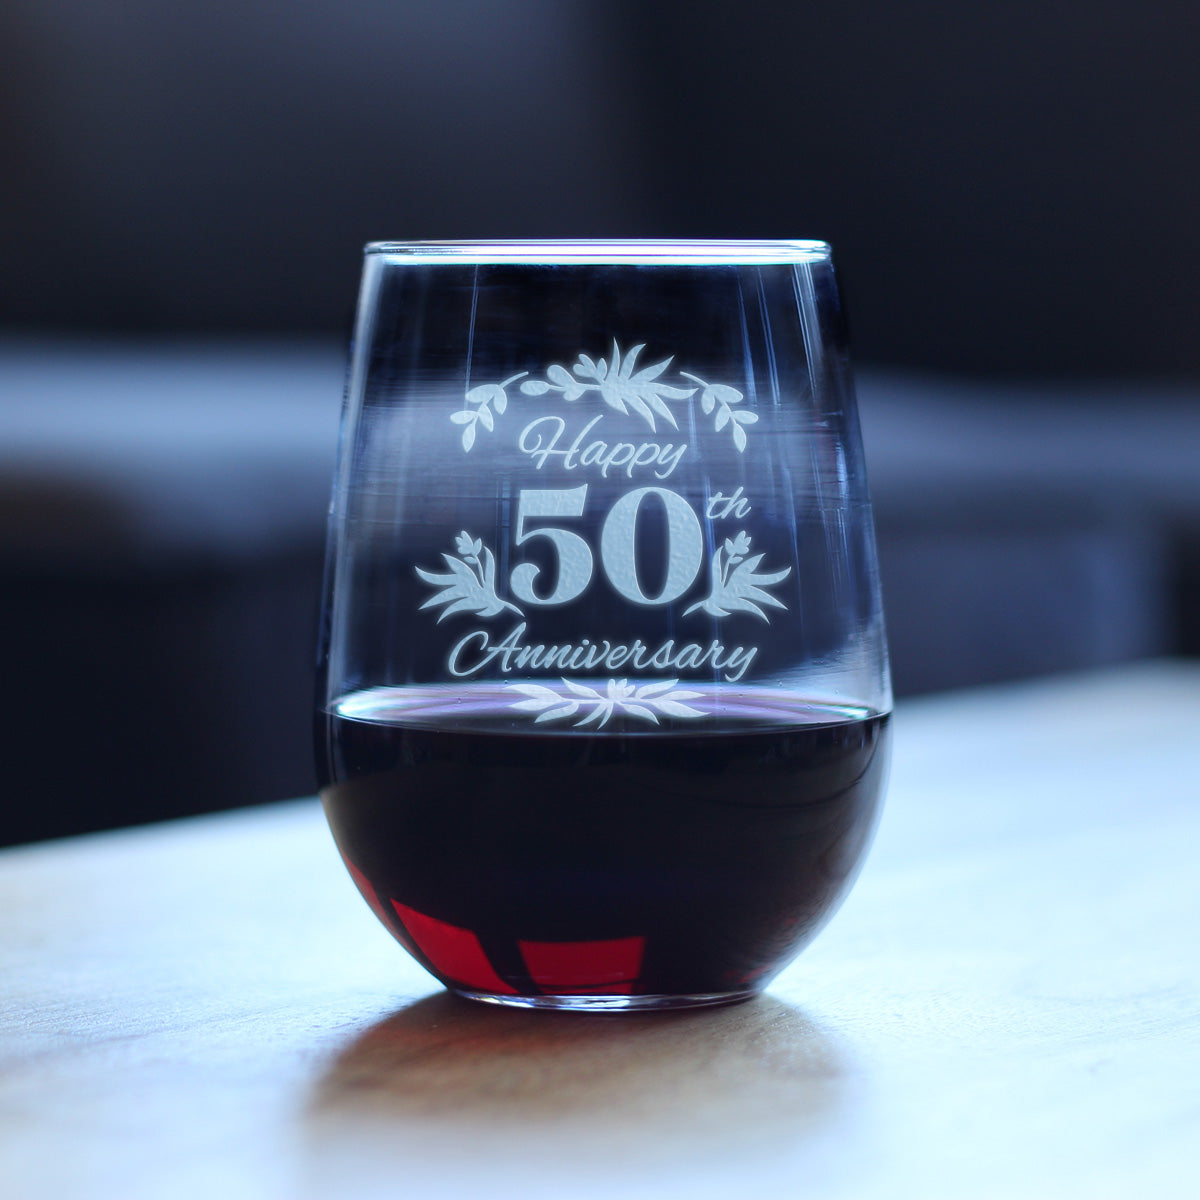 Happy 50th Anniversary - Stemless Wine Glass Gifts for Women &amp; Men - 50 Year Anniversary Party Decor - Large Glasses